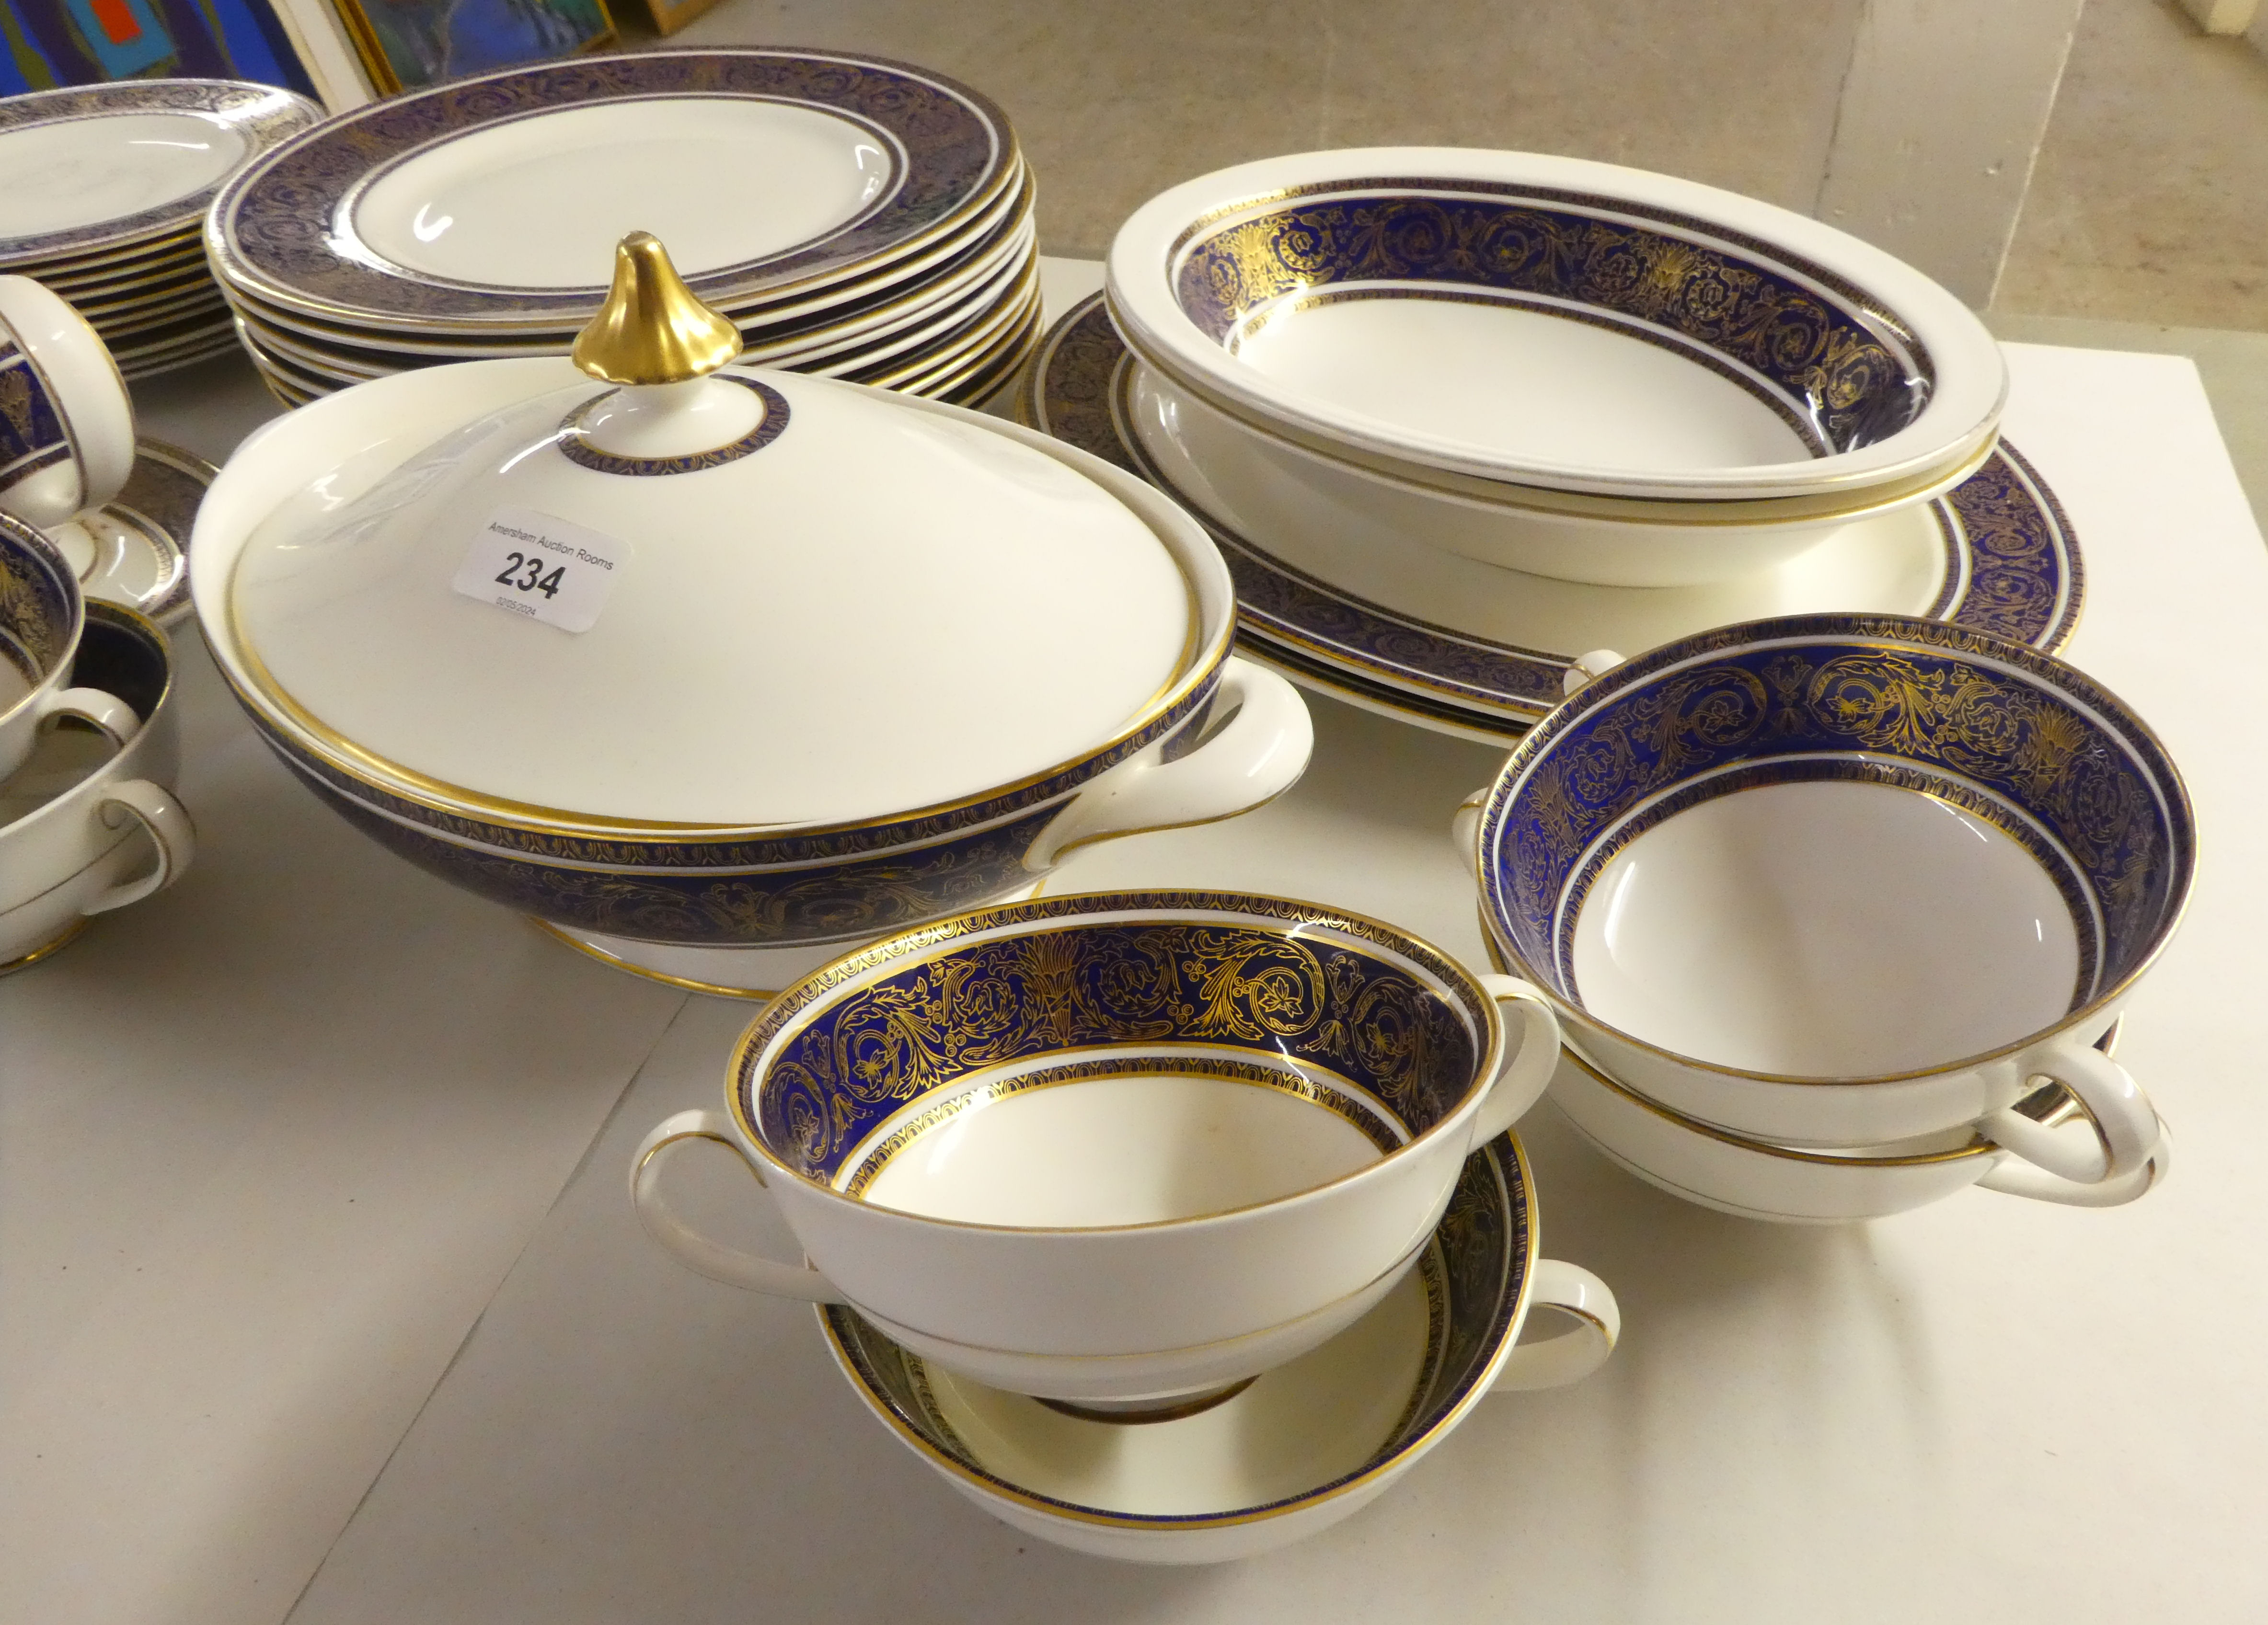 Royal Doulton fine bone china Imperial Blue pattern tableware - Image 2 of 4